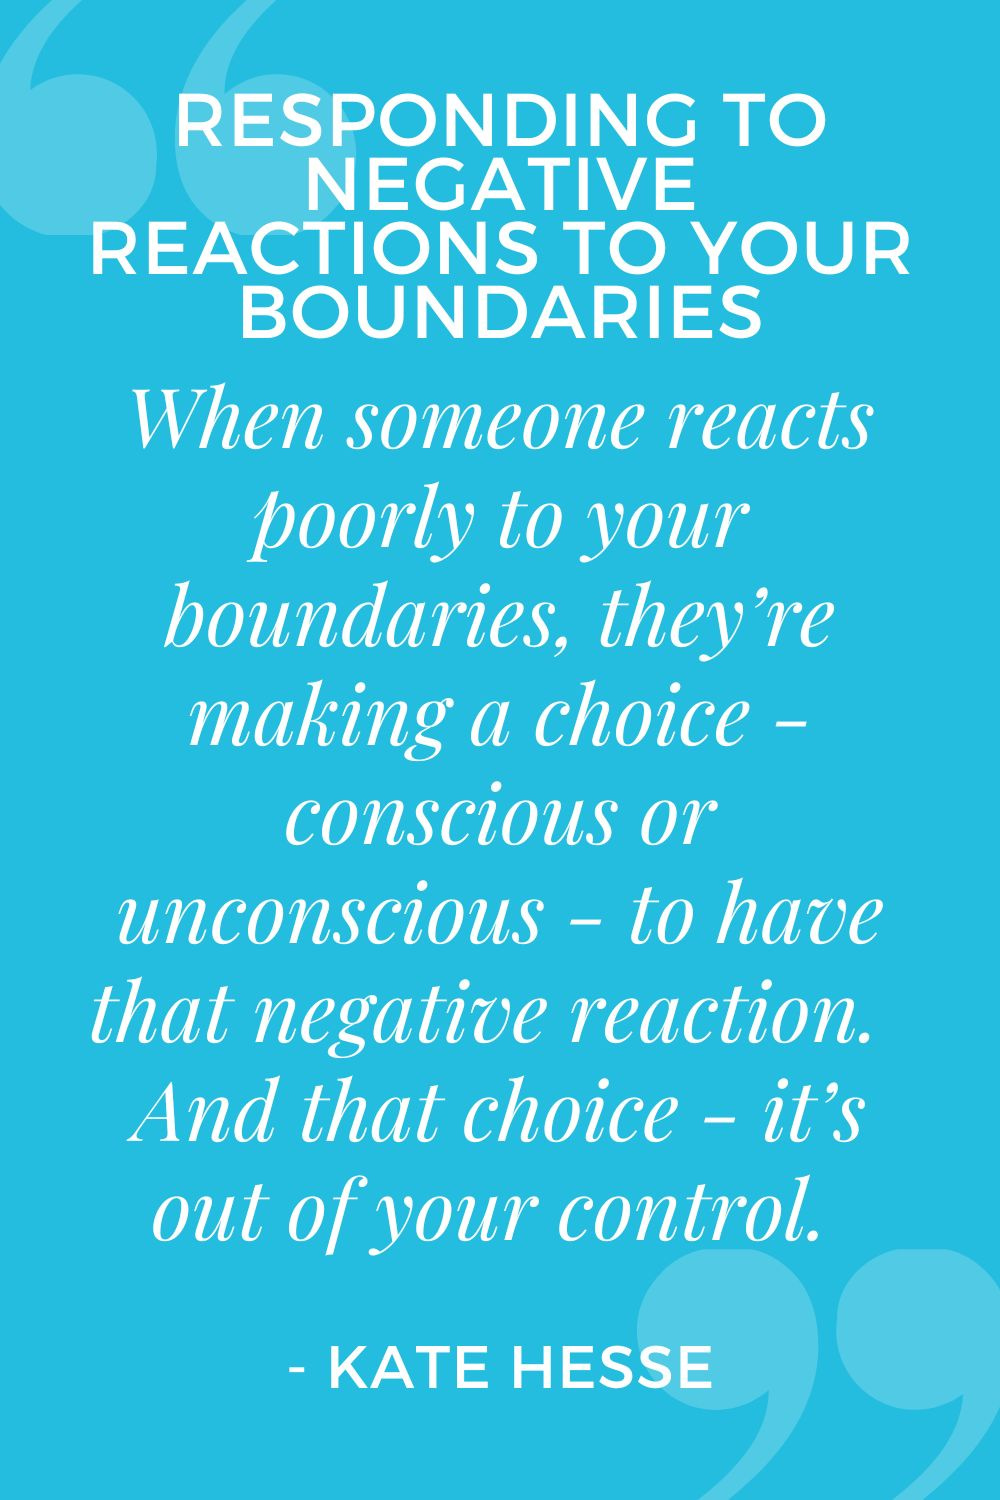 When someone reacts poorly to your boundaries, they're making a choice - conscious or unconscious - to have that negative reaction. And that choice - it's out of your control.